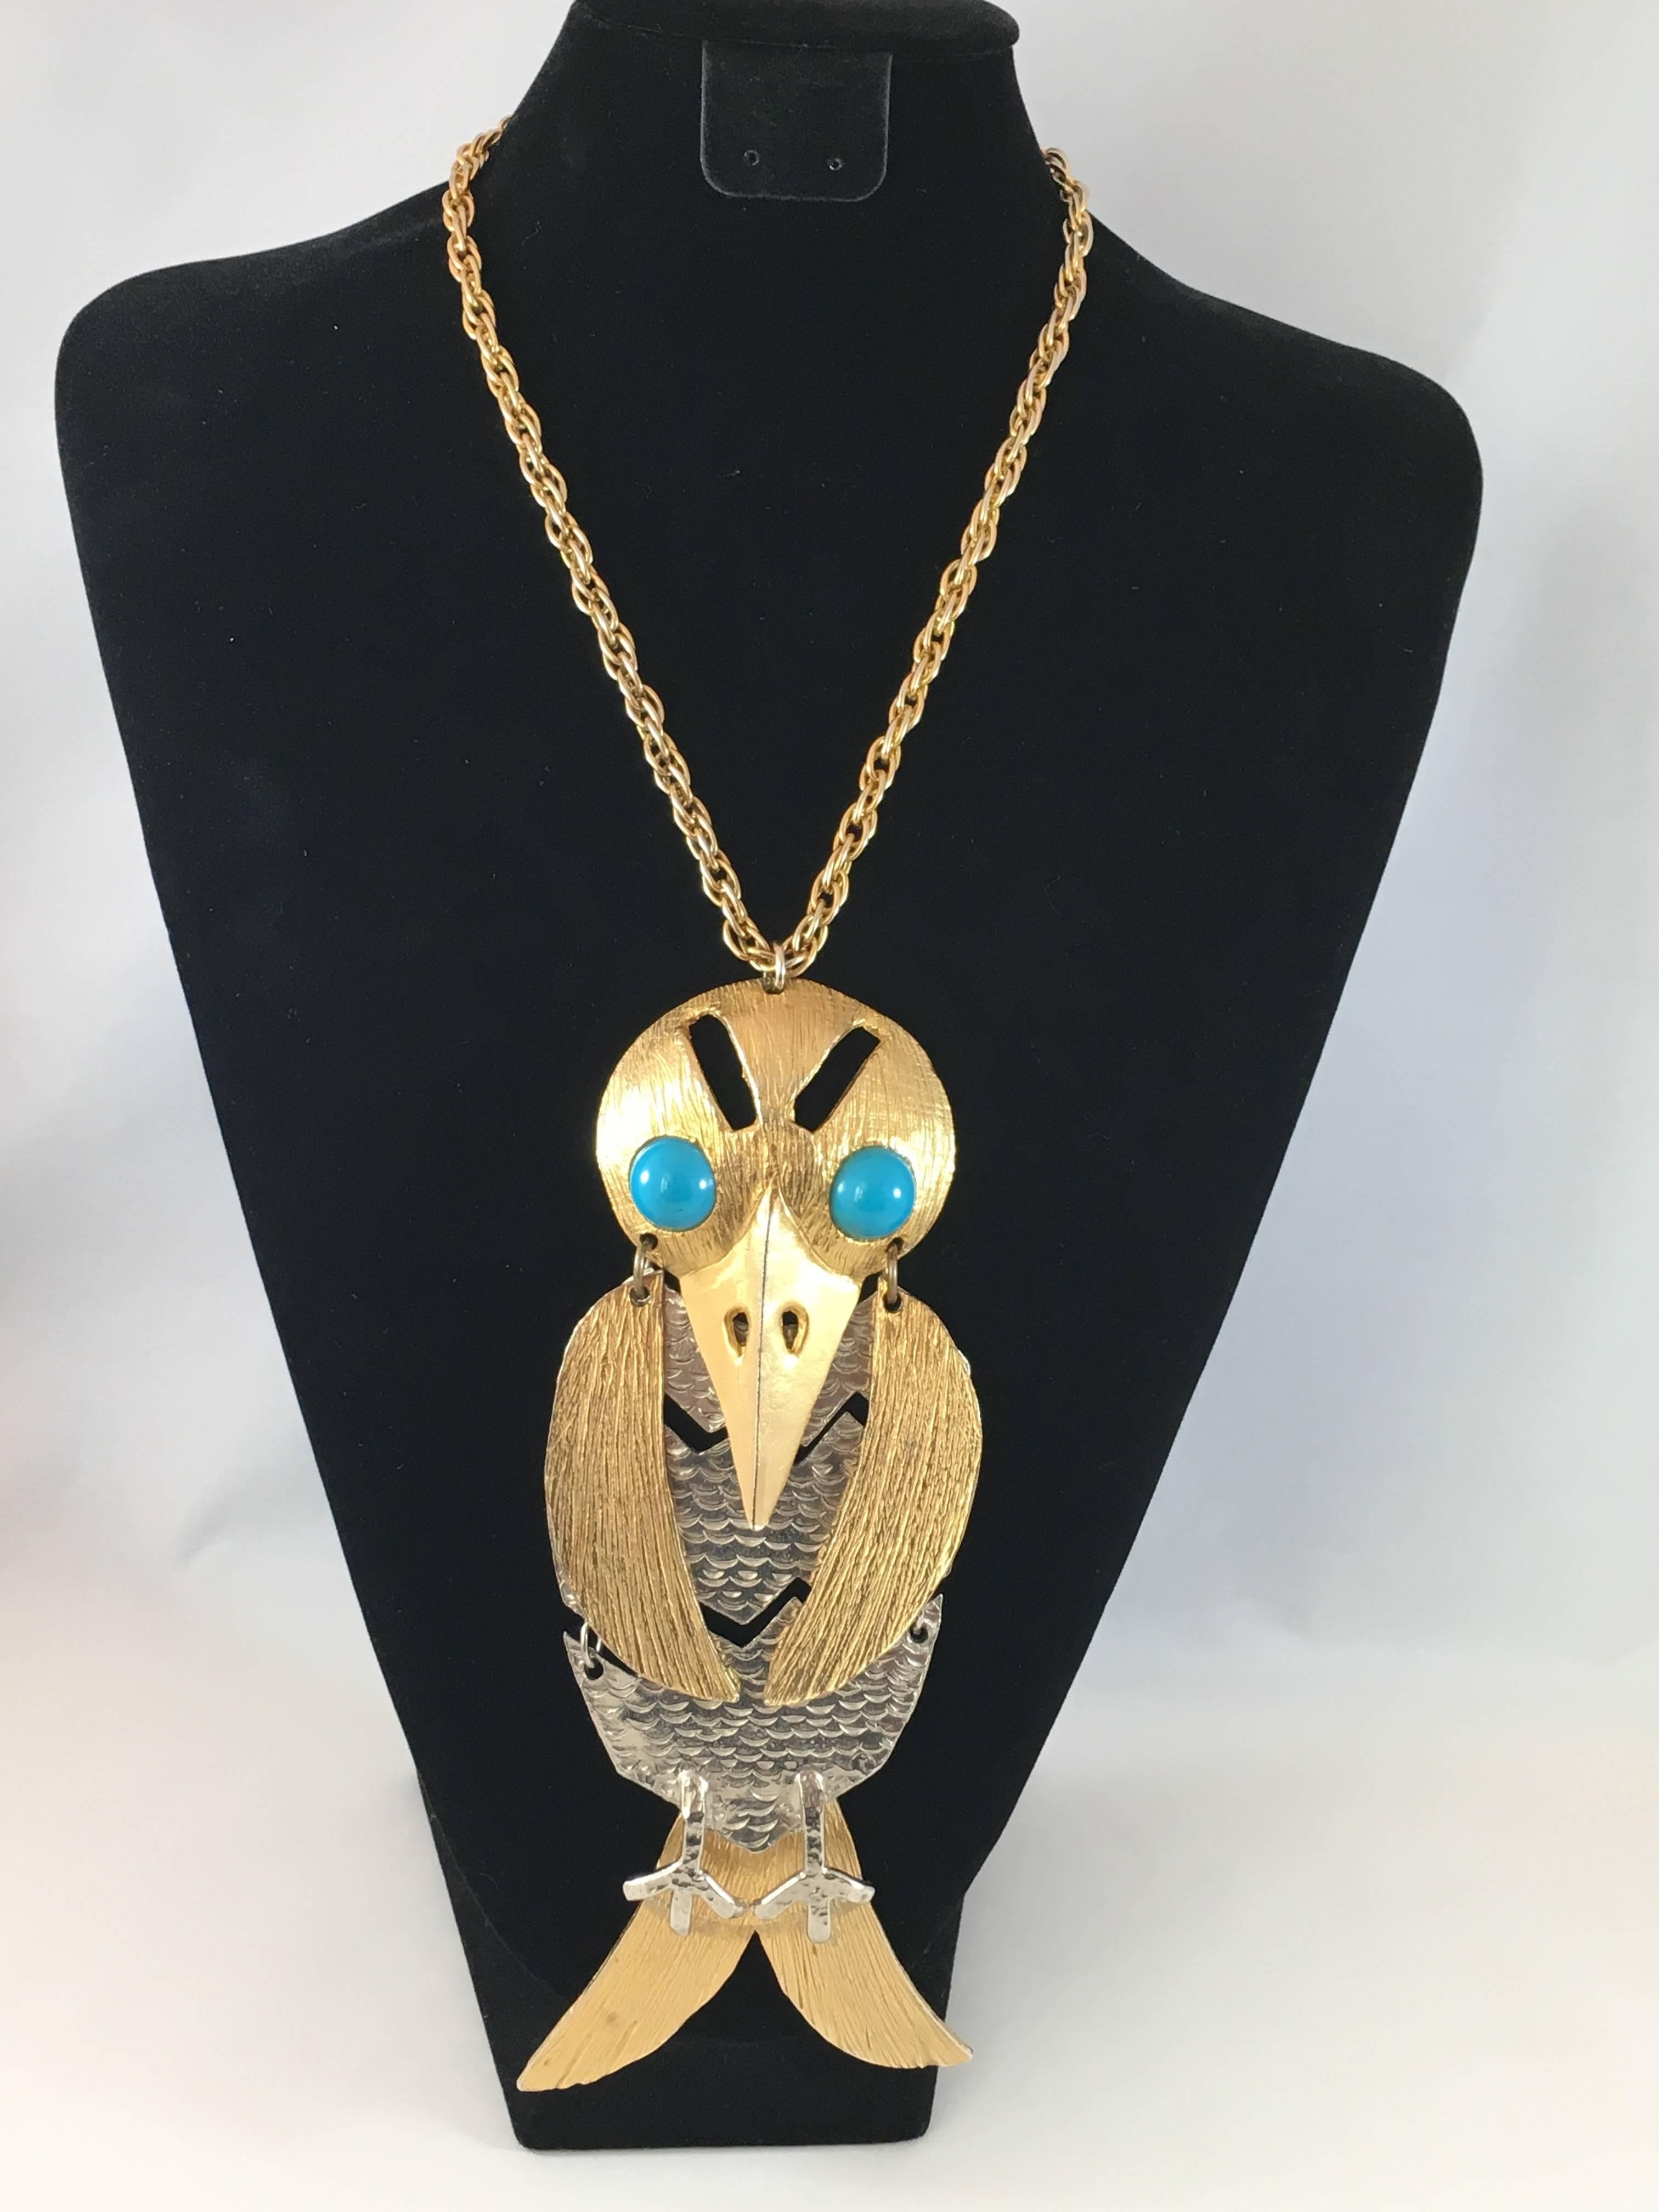 This is a huge 1970s bird pendant necklace from Kenneth Jay Lane. The pendant is enormous. It measures 7 1/2" long x 3 1/4"wide. The chain is 18 1/2" long. The pendant is made up of seven articulated sections - the bird's body, head,